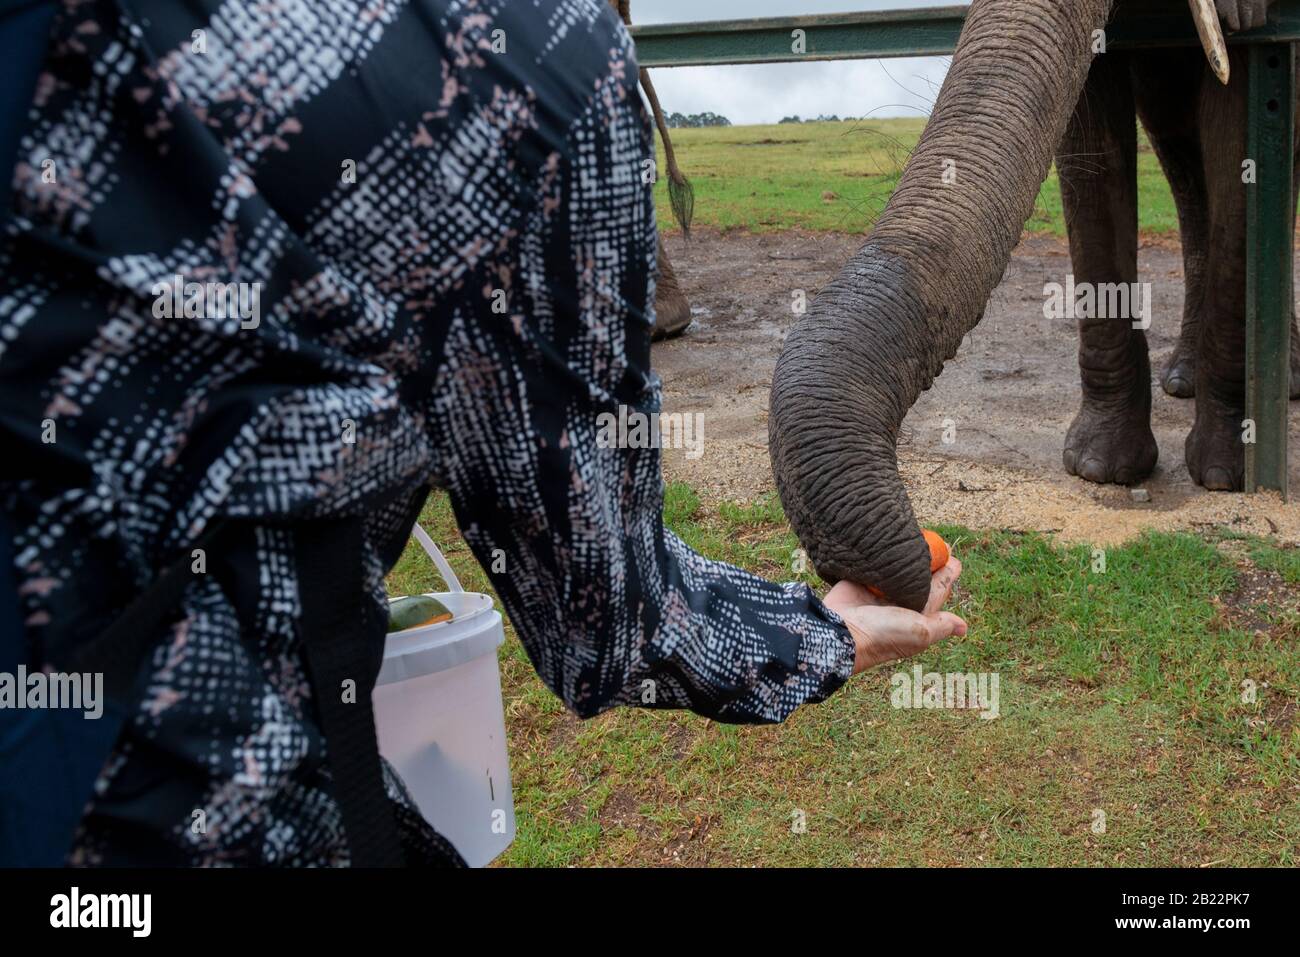 Knysna Elephant Park is a sanctuary caring for rescued African elephants where visitors can walk with and feed the animals near Knysna,South Africa Stock Photo